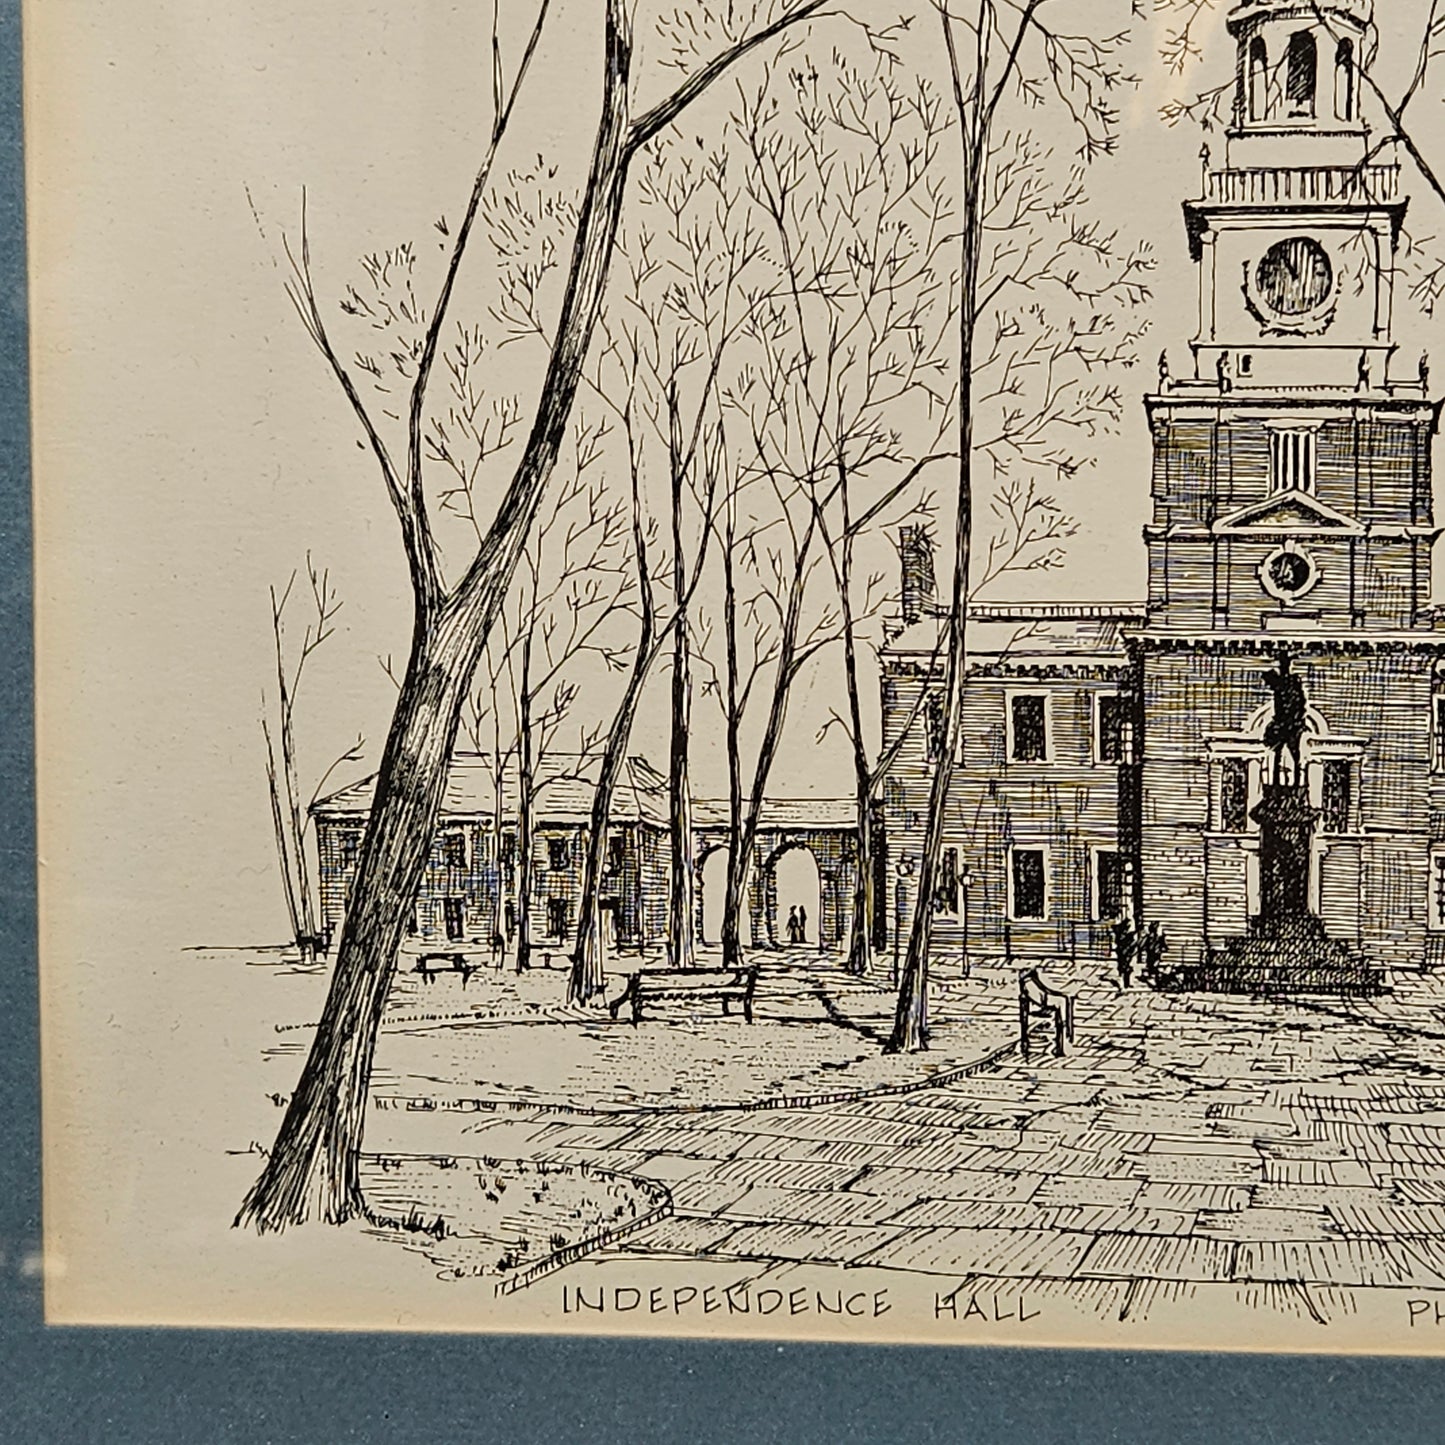 1992 Legal Expo Independence Hall Print